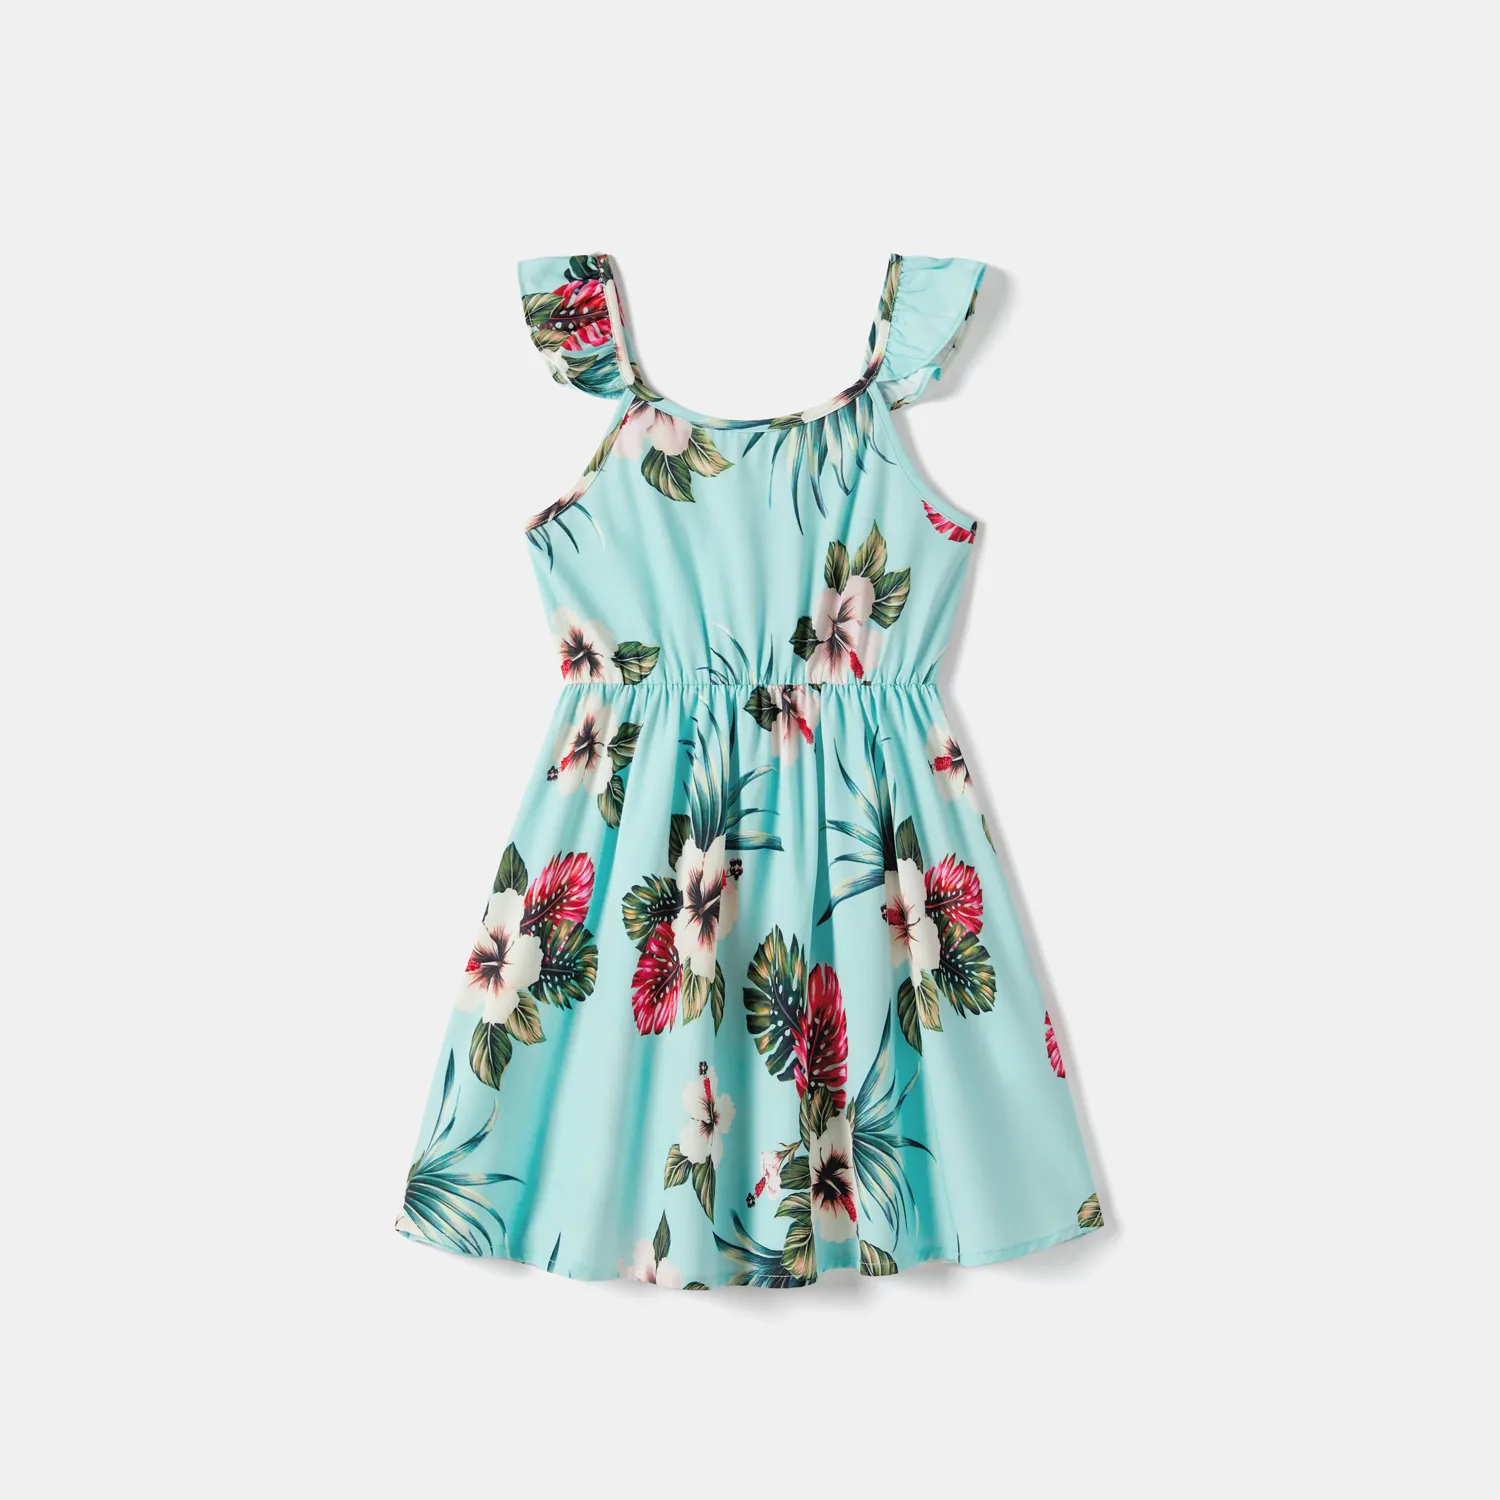 Family Matching Allover Floral Print Cami Dresses and Short-sleeve Shirts/Tops Sets